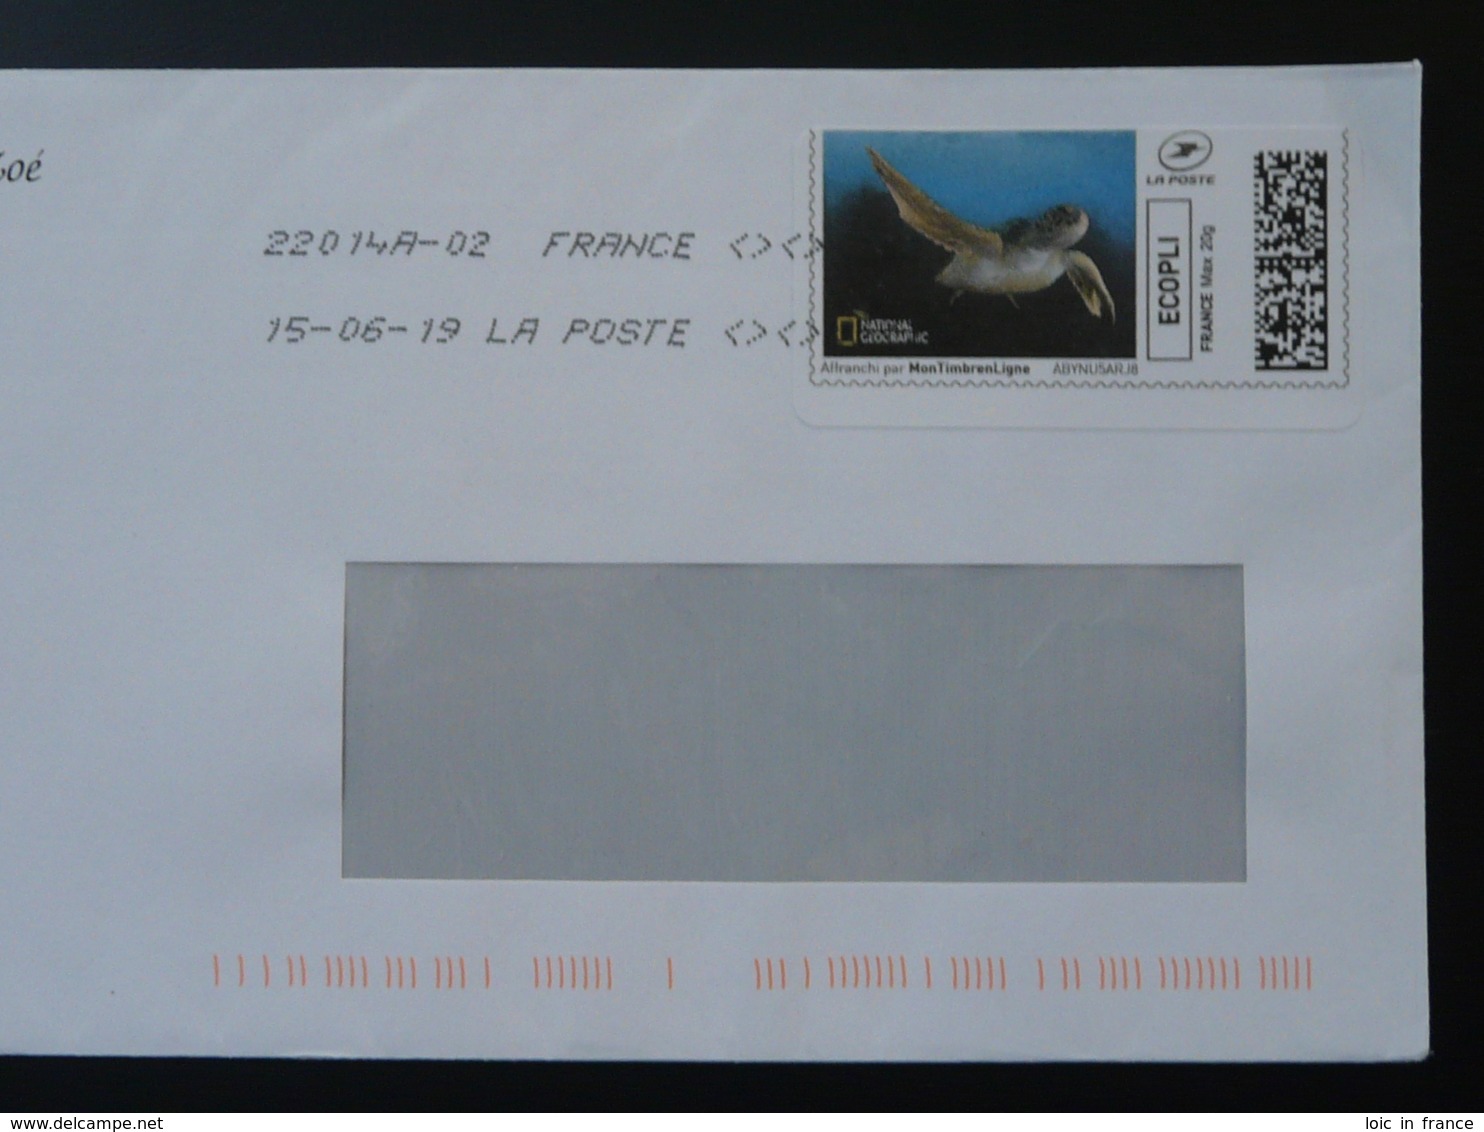 Tortue Marine Turtle National Geographic Timbre En Ligne Sur Lettre (e-stamp On Cover) TPP 4558 - Tortues